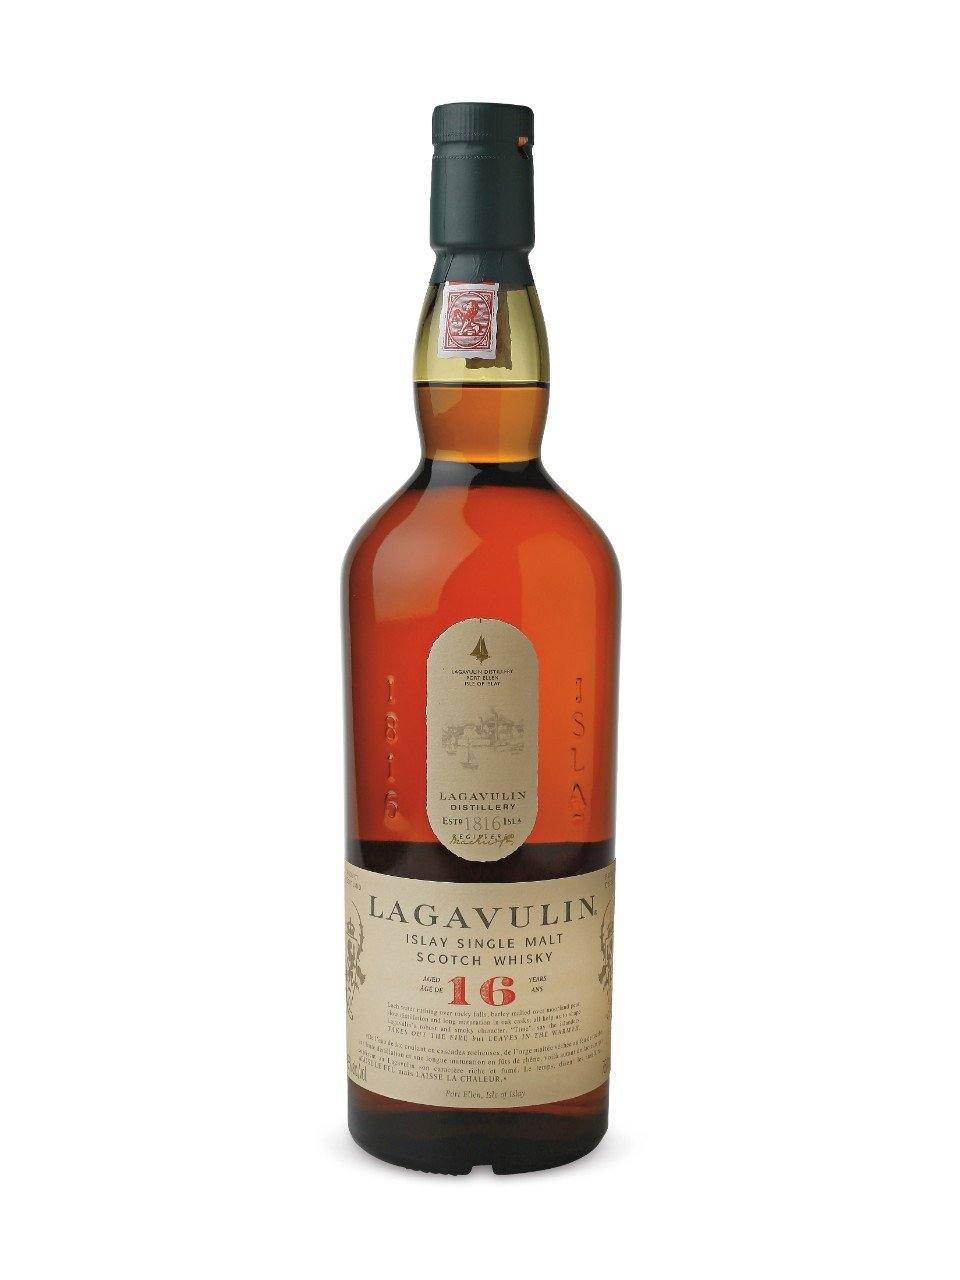 Lagavulin 16 Year Old Islay Single Malt Scotch Whisky | Exquisite Wine & Alcohol Gift Delivery Toronto Canada | Vyno